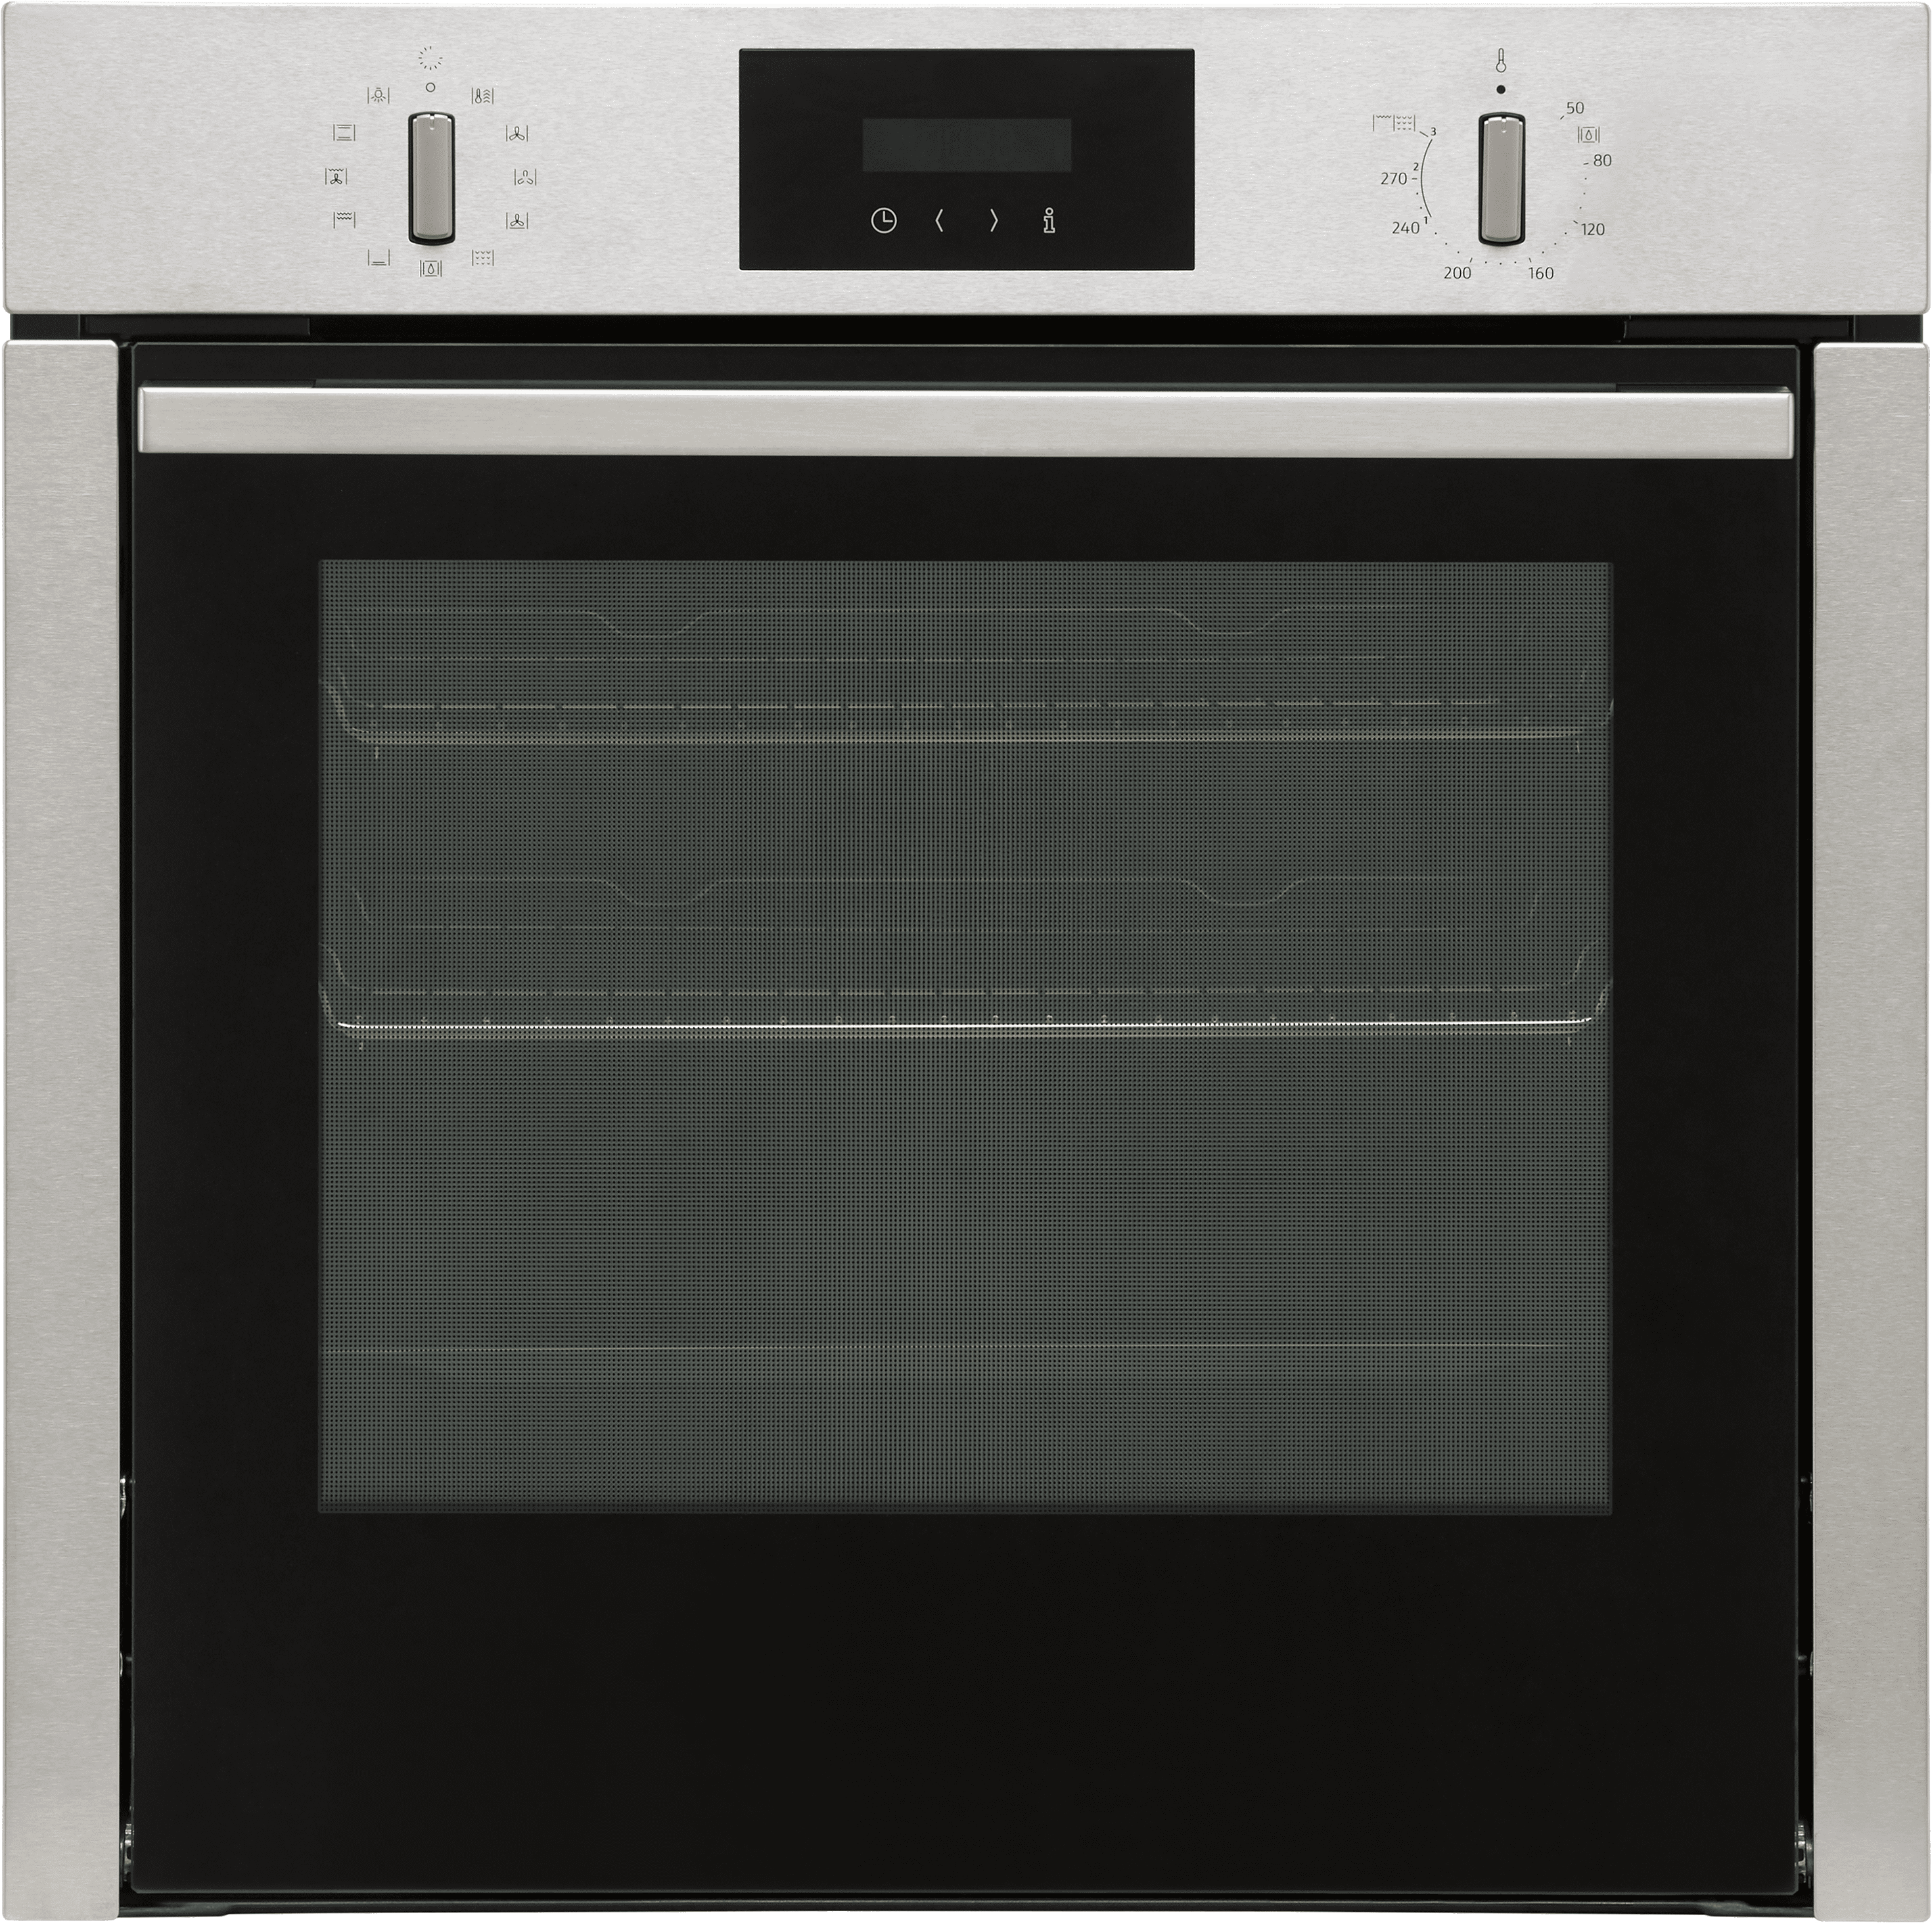 NEFF N30 Slide&Hide B6CCG7AN0B Built In Electric Single Oven and Pyrolytic Cleaning - Stainless Steel - A Rated, Stainless Steel